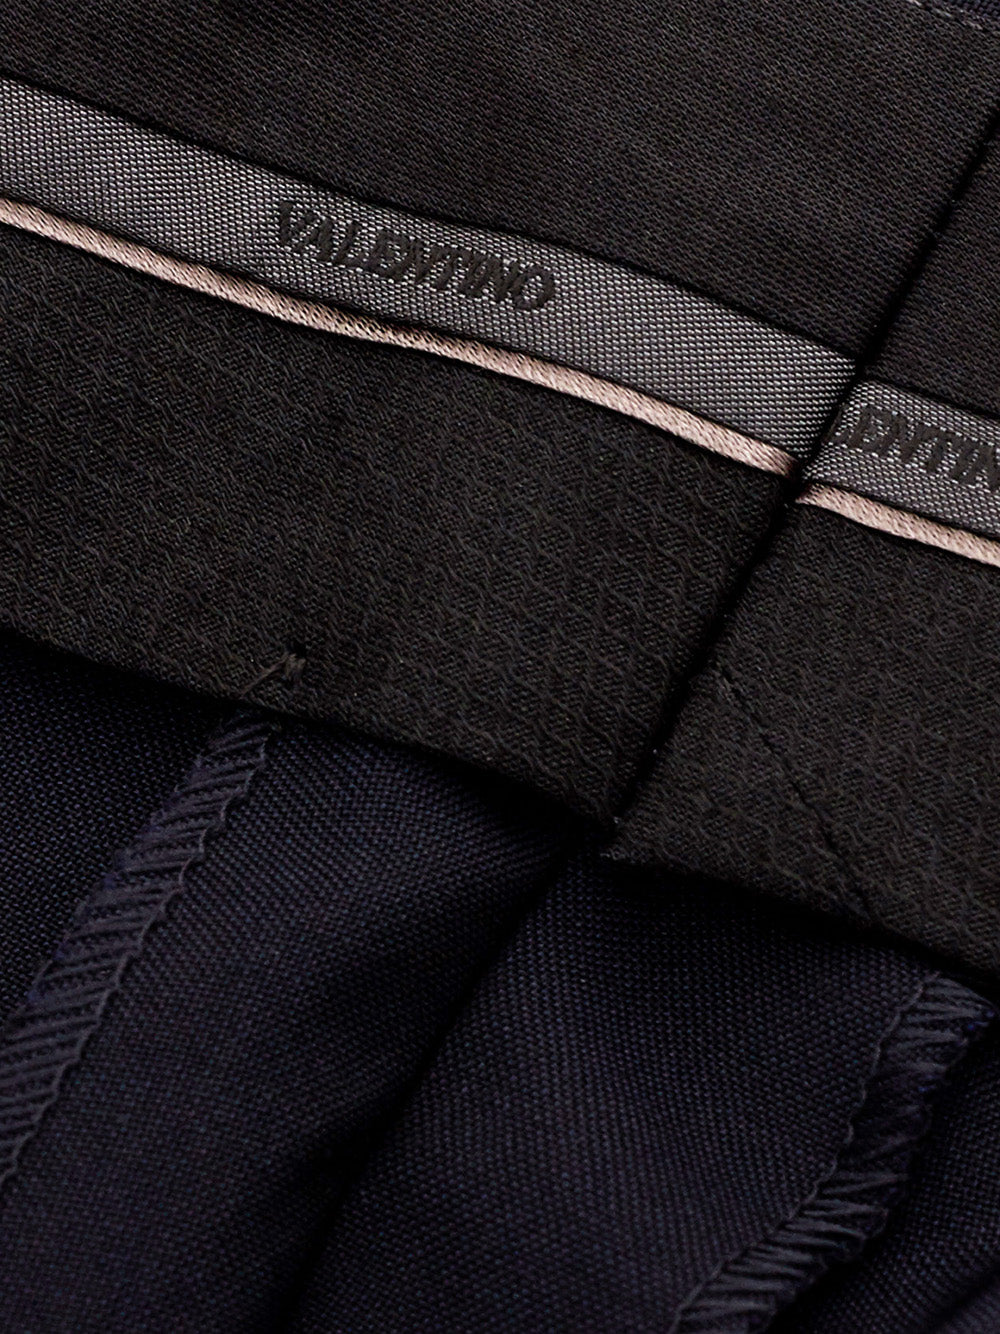 Valentino Tailored Wool Blend Blue Trousers